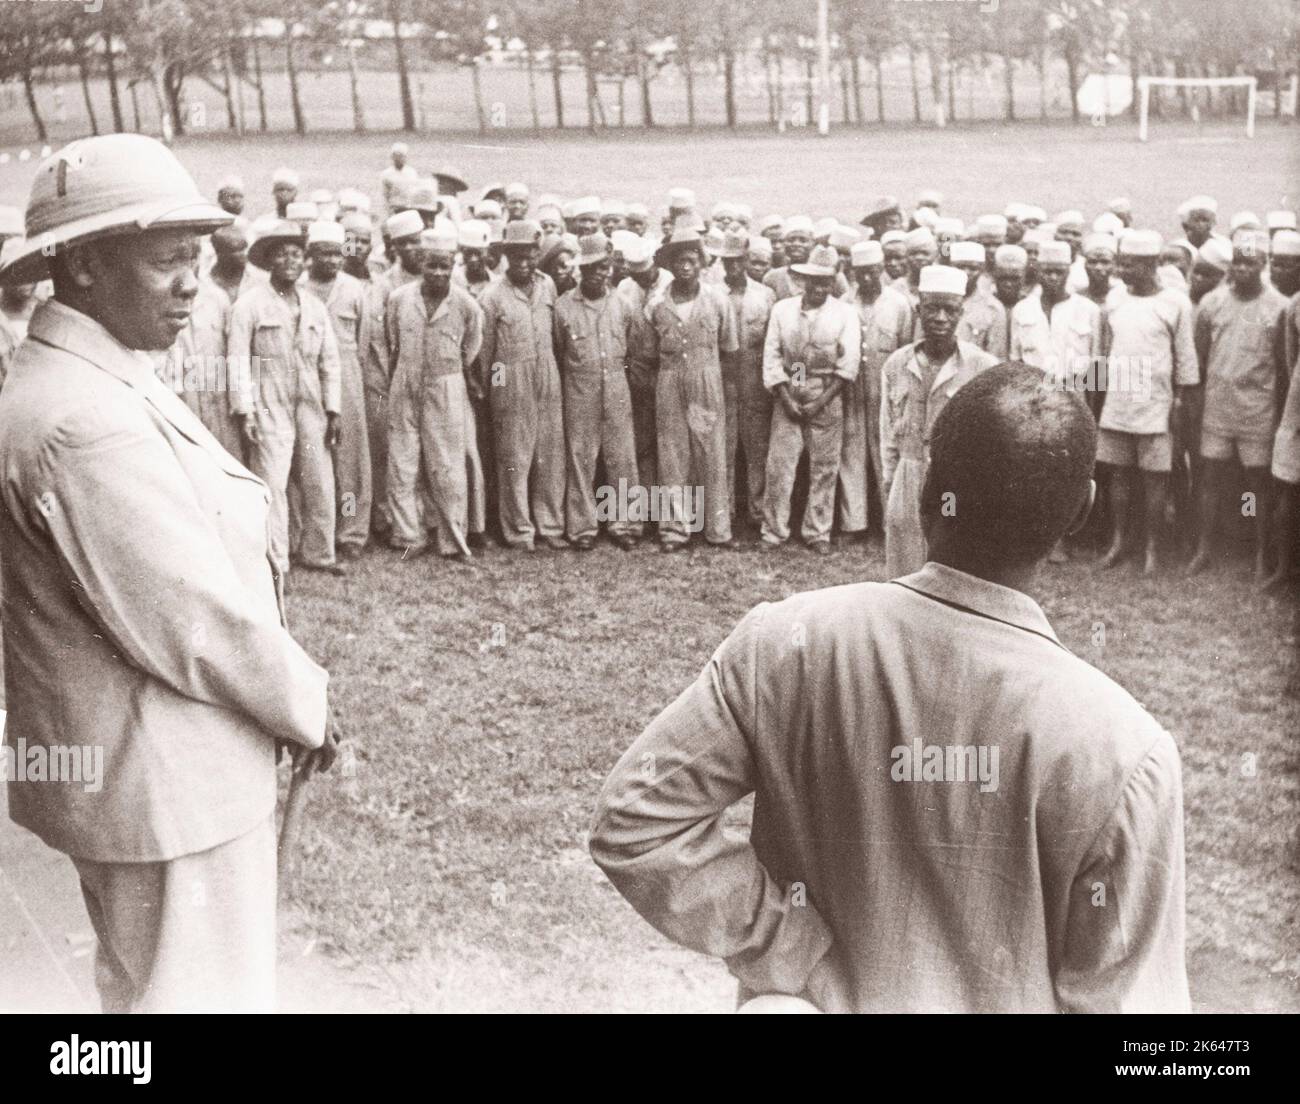 1940s East Africa - Uganda - dignitaries addressing Askari troops recruits - possibly the Kabala of Buganda Photograph by a British army recruitment officer stationed in East Africa and the Middle East during World War II Stock Photo